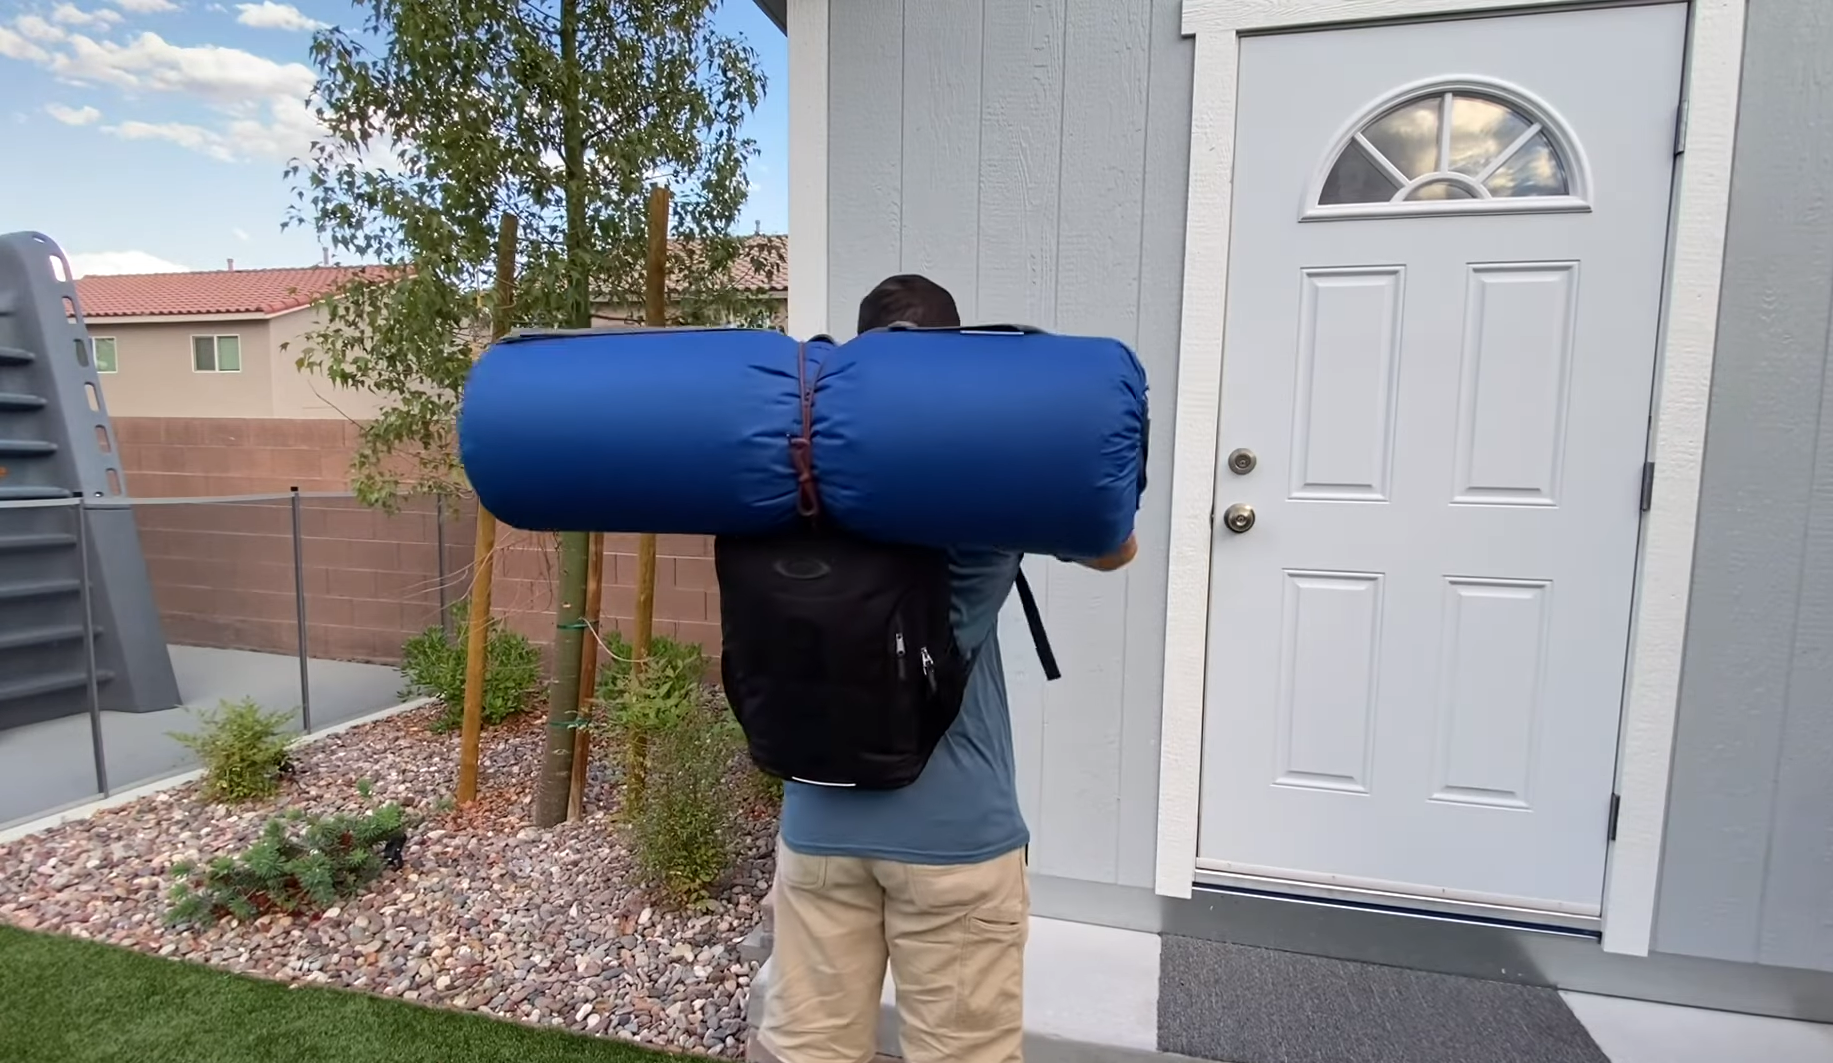 Consider attaching the tent on the outside of the backpack